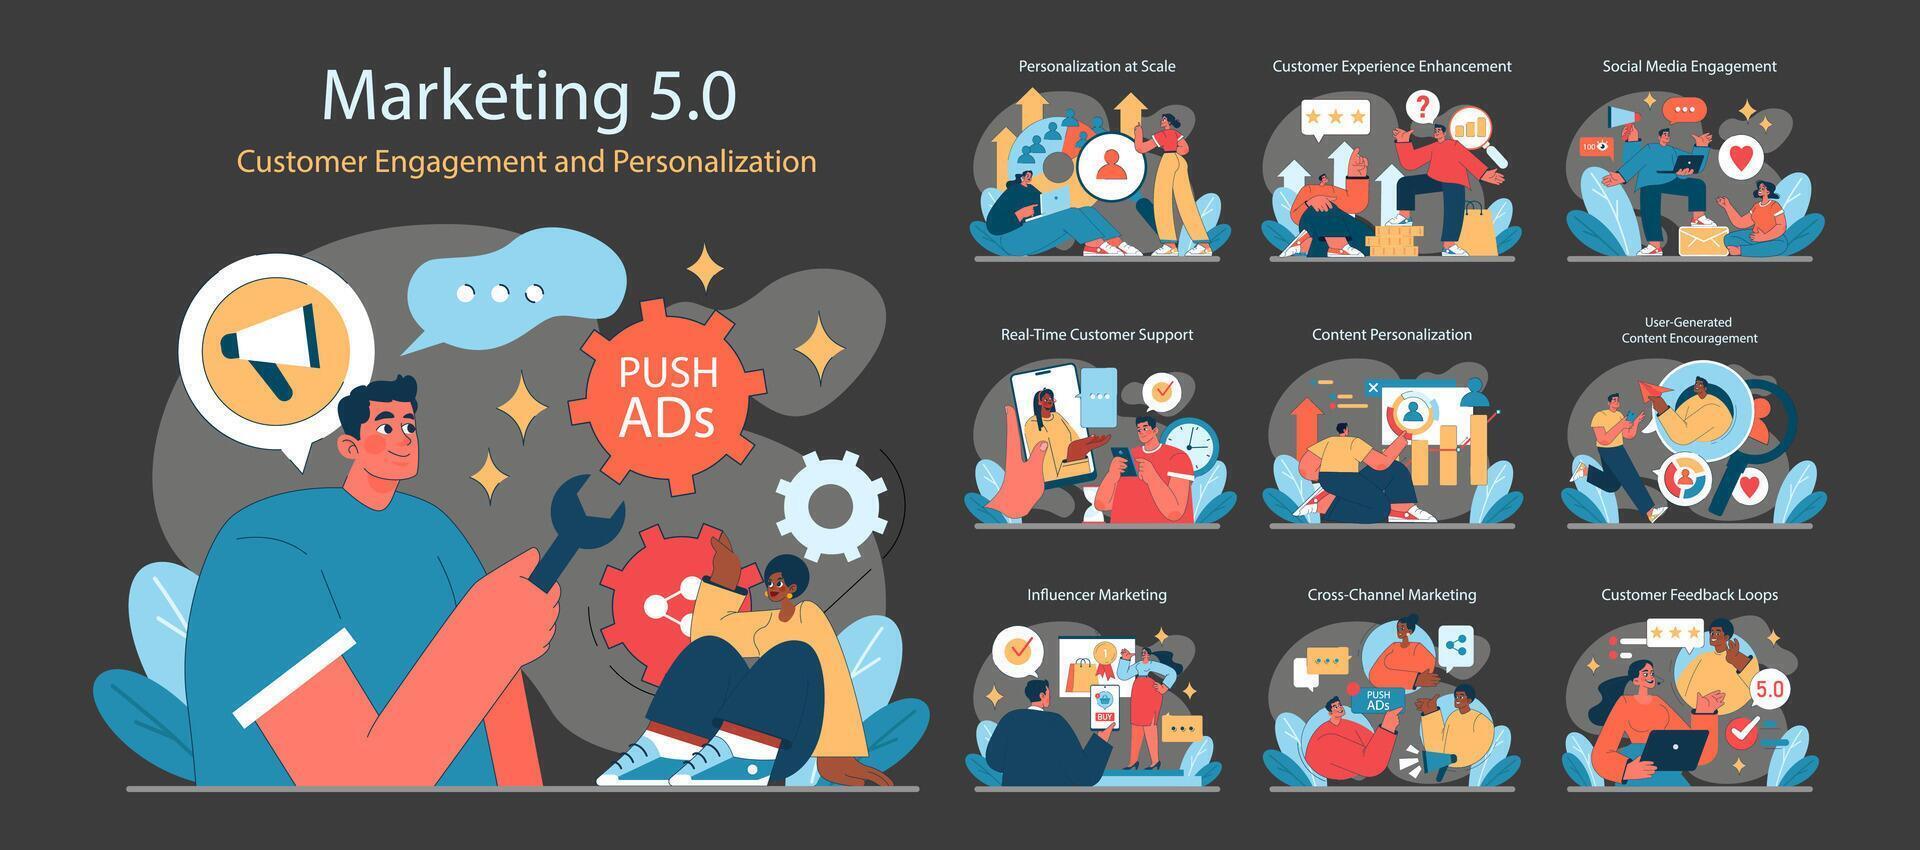 Marketing 5.0 set. A vibrant depiction of customer engagement and personalization vector